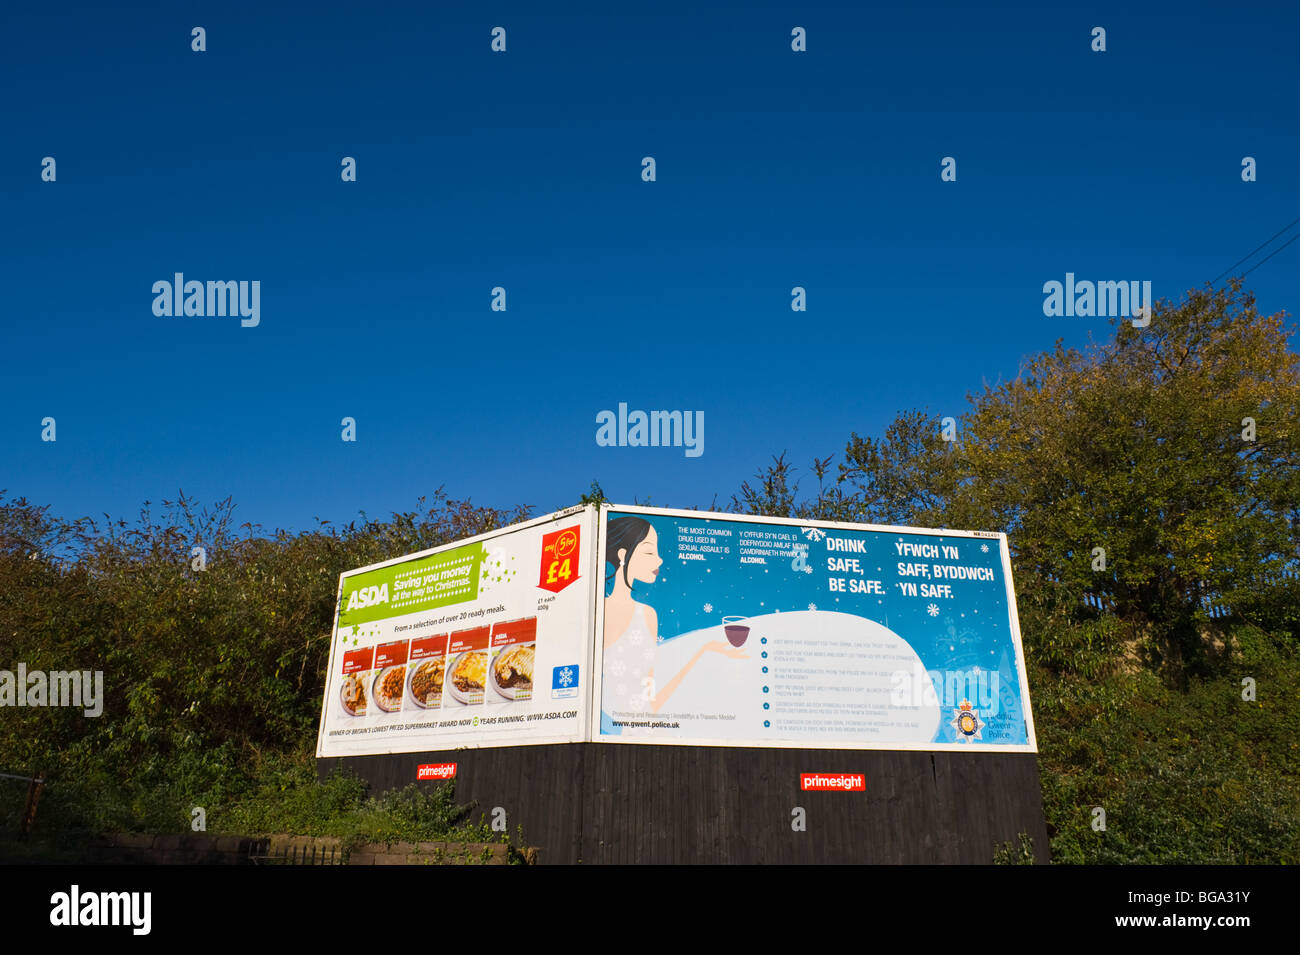 primesight billboard site featuring ASDA and Gwent Police DRINK SAFE posters in Newport South Wales UK Stock Photo